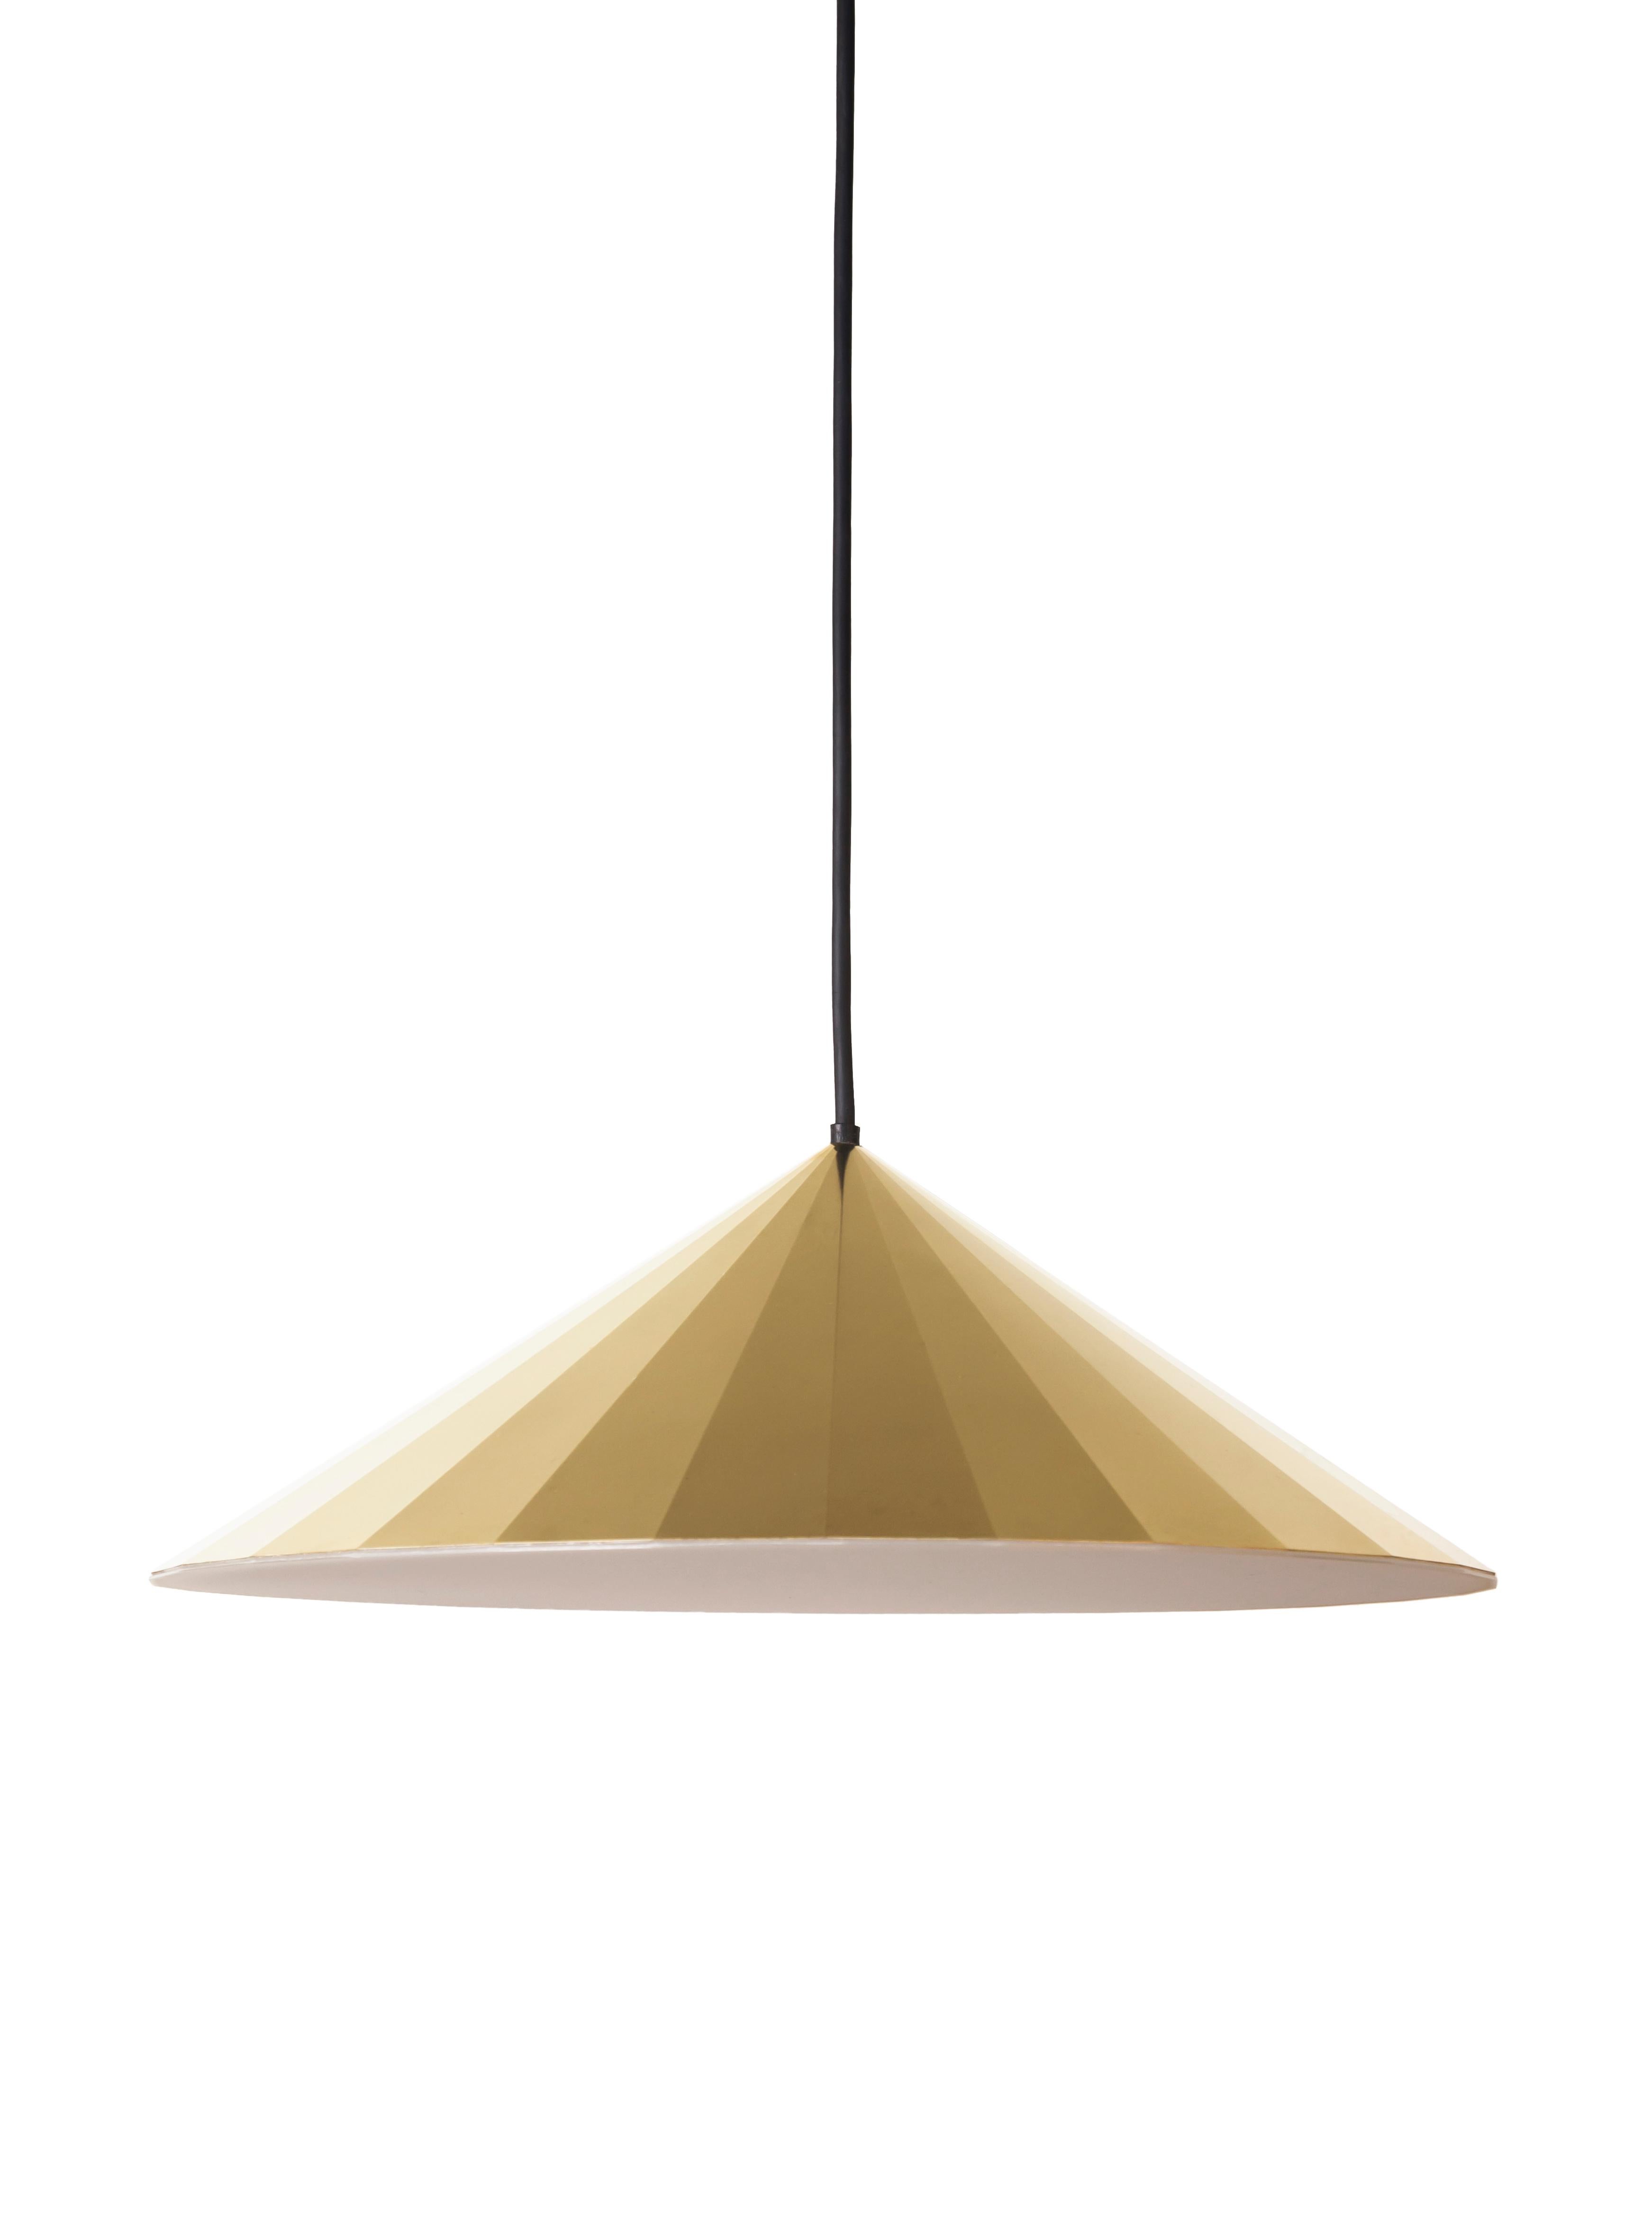 The shape of this pendant lamp is constructed by folding a 0,3mm thin brass sheet. For precise bending, lines have been etched halfway into the material. The polished brass beautifully reflects its surroundings. Each facet gets a different tone,